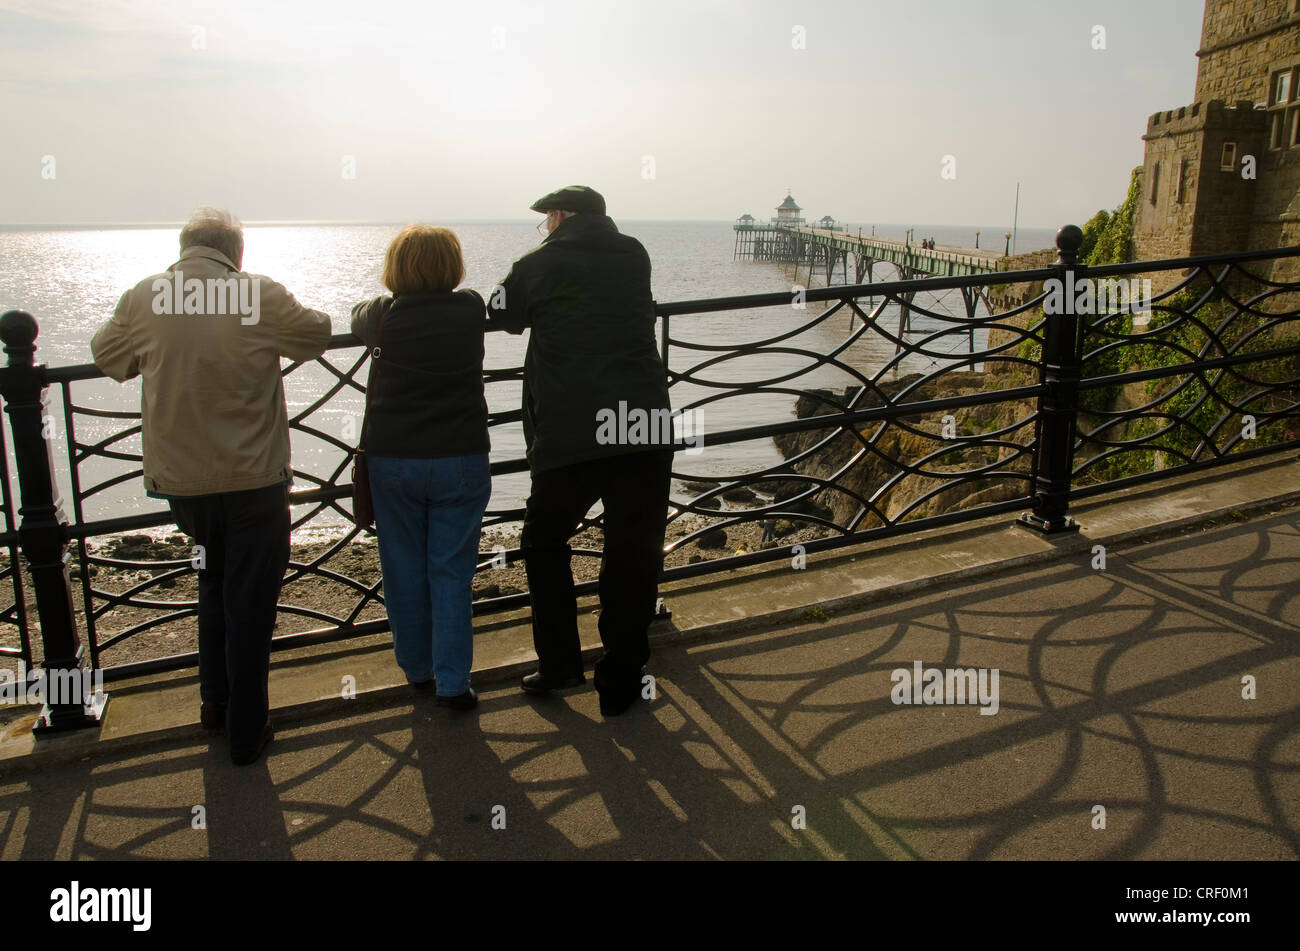 Three people looking at Clevedon Pier, Promenade, Clevedon, Somerset, United Kingdom, Europe Stock Photo